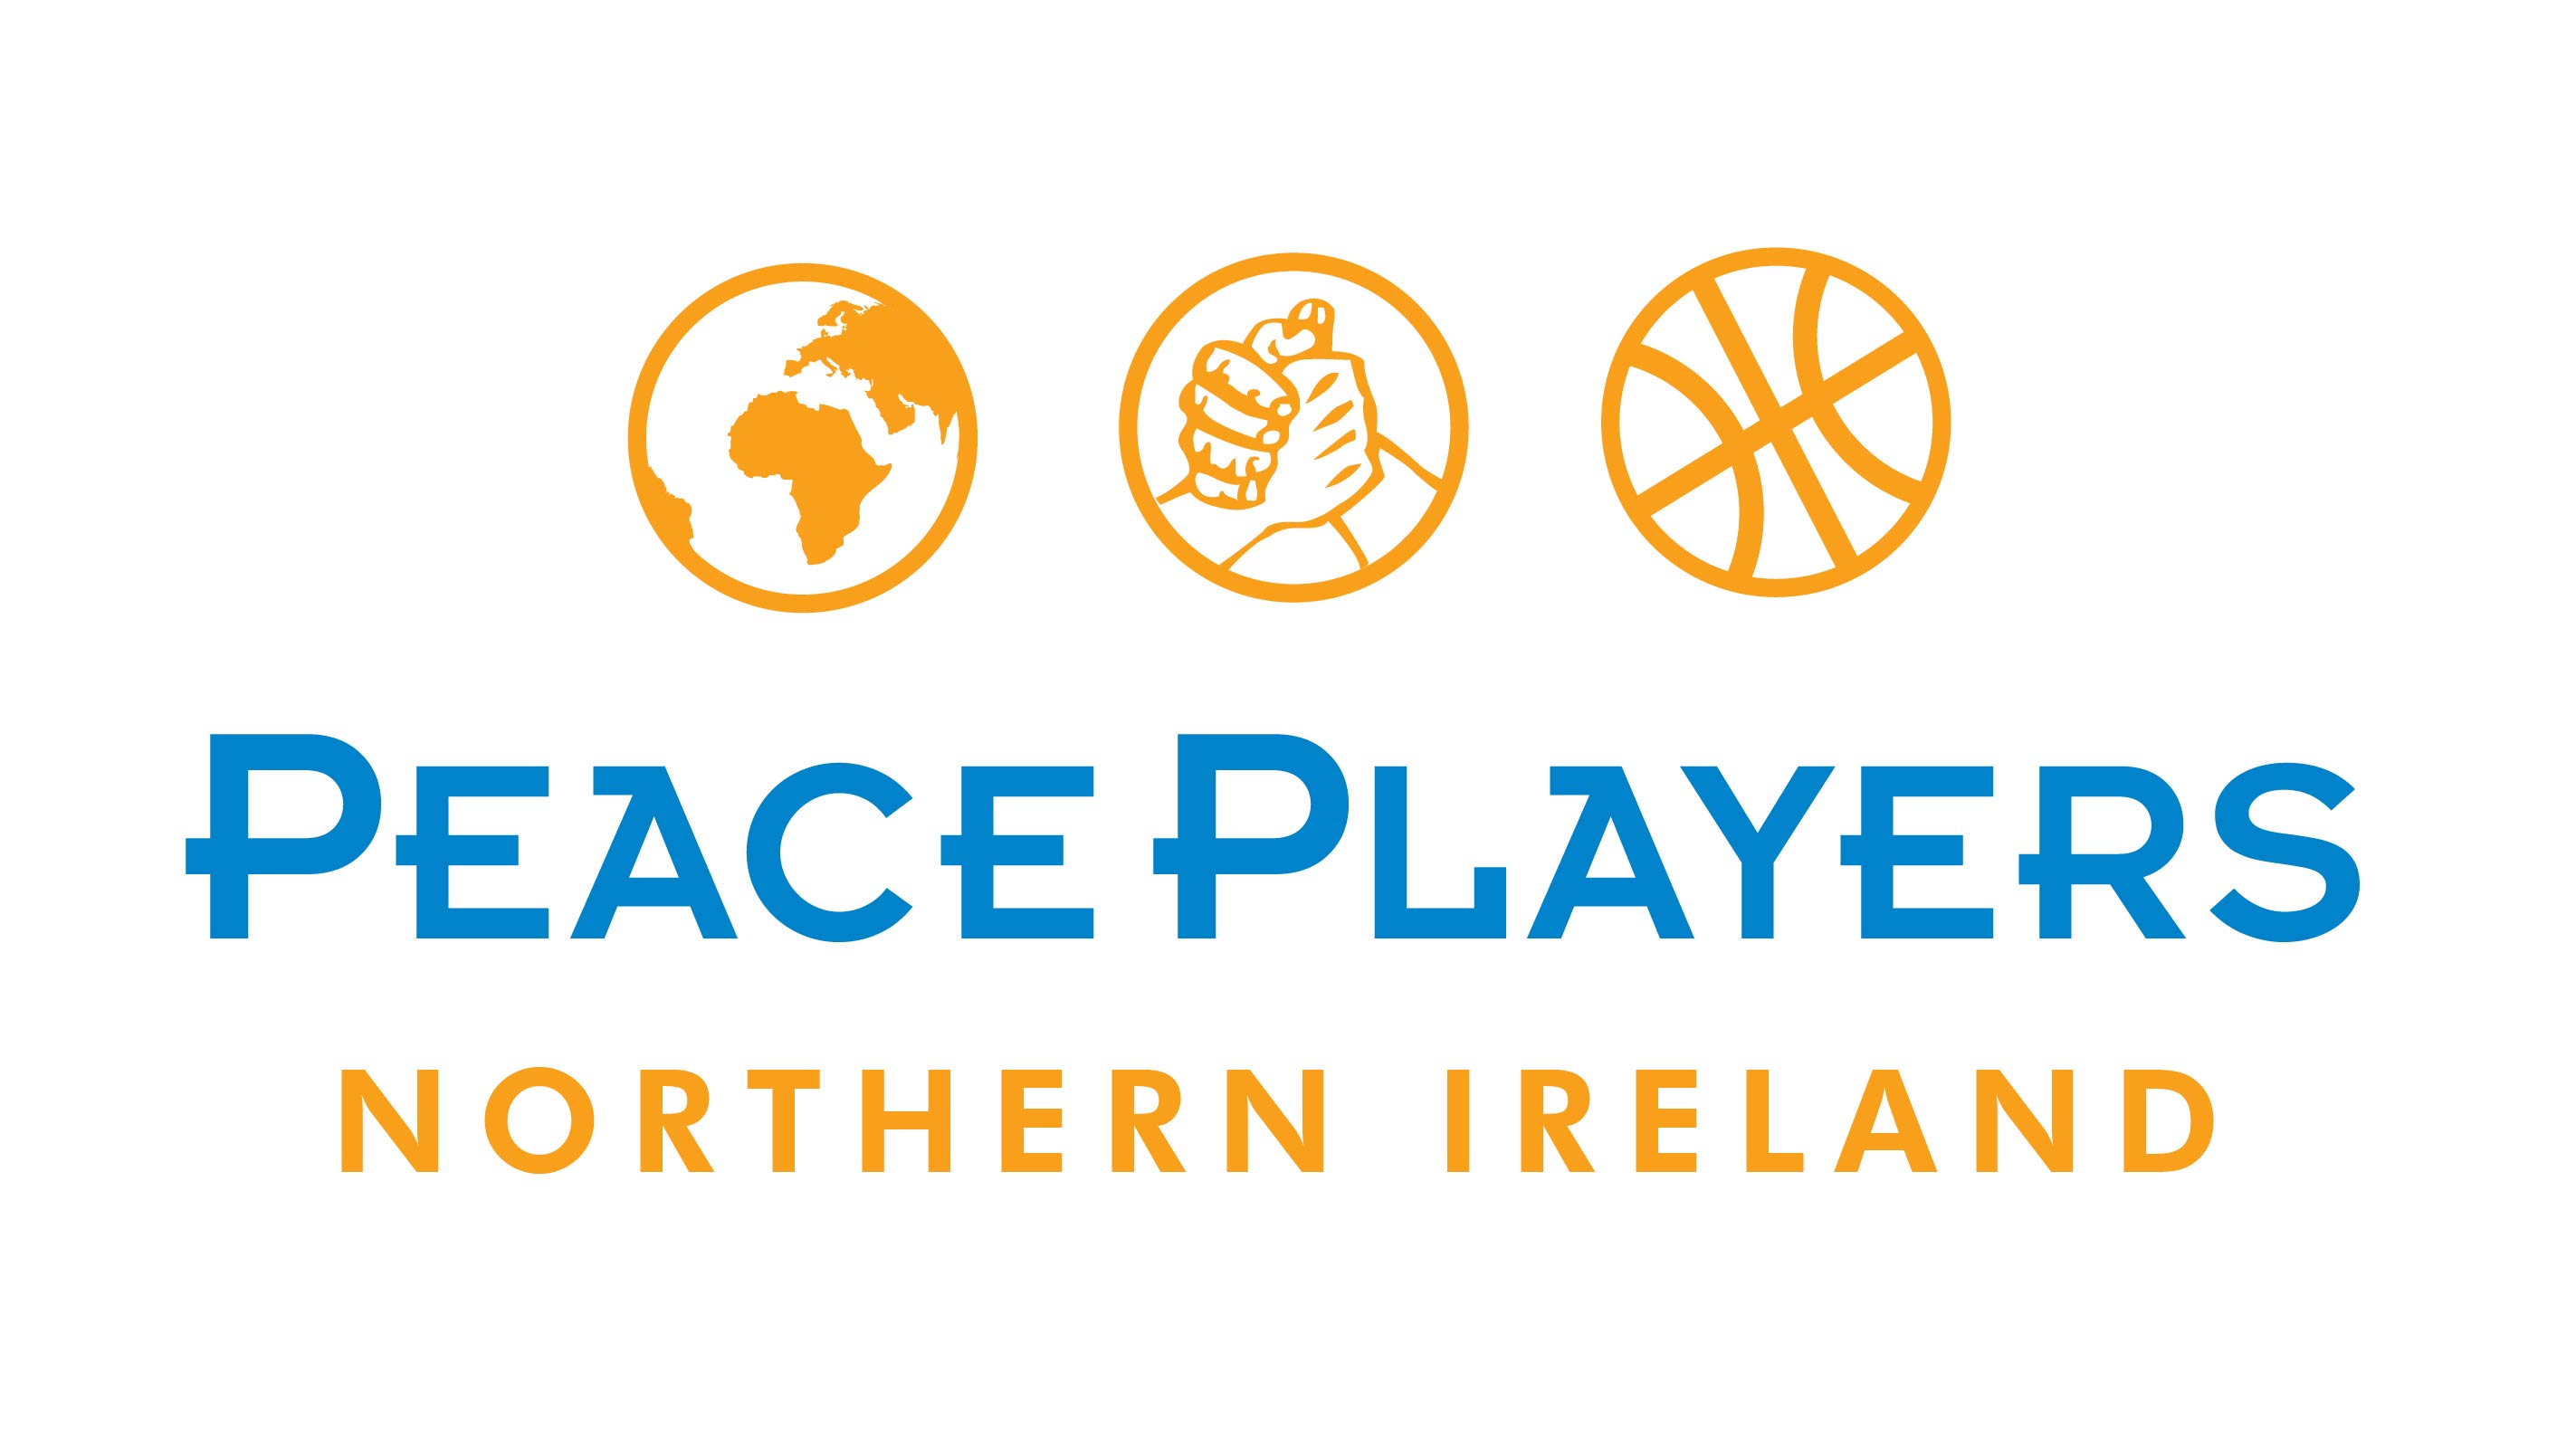 PeacePlayers – Celebrating 20 Years of Building Positive Relations & Celebrating Diversity Through Sport